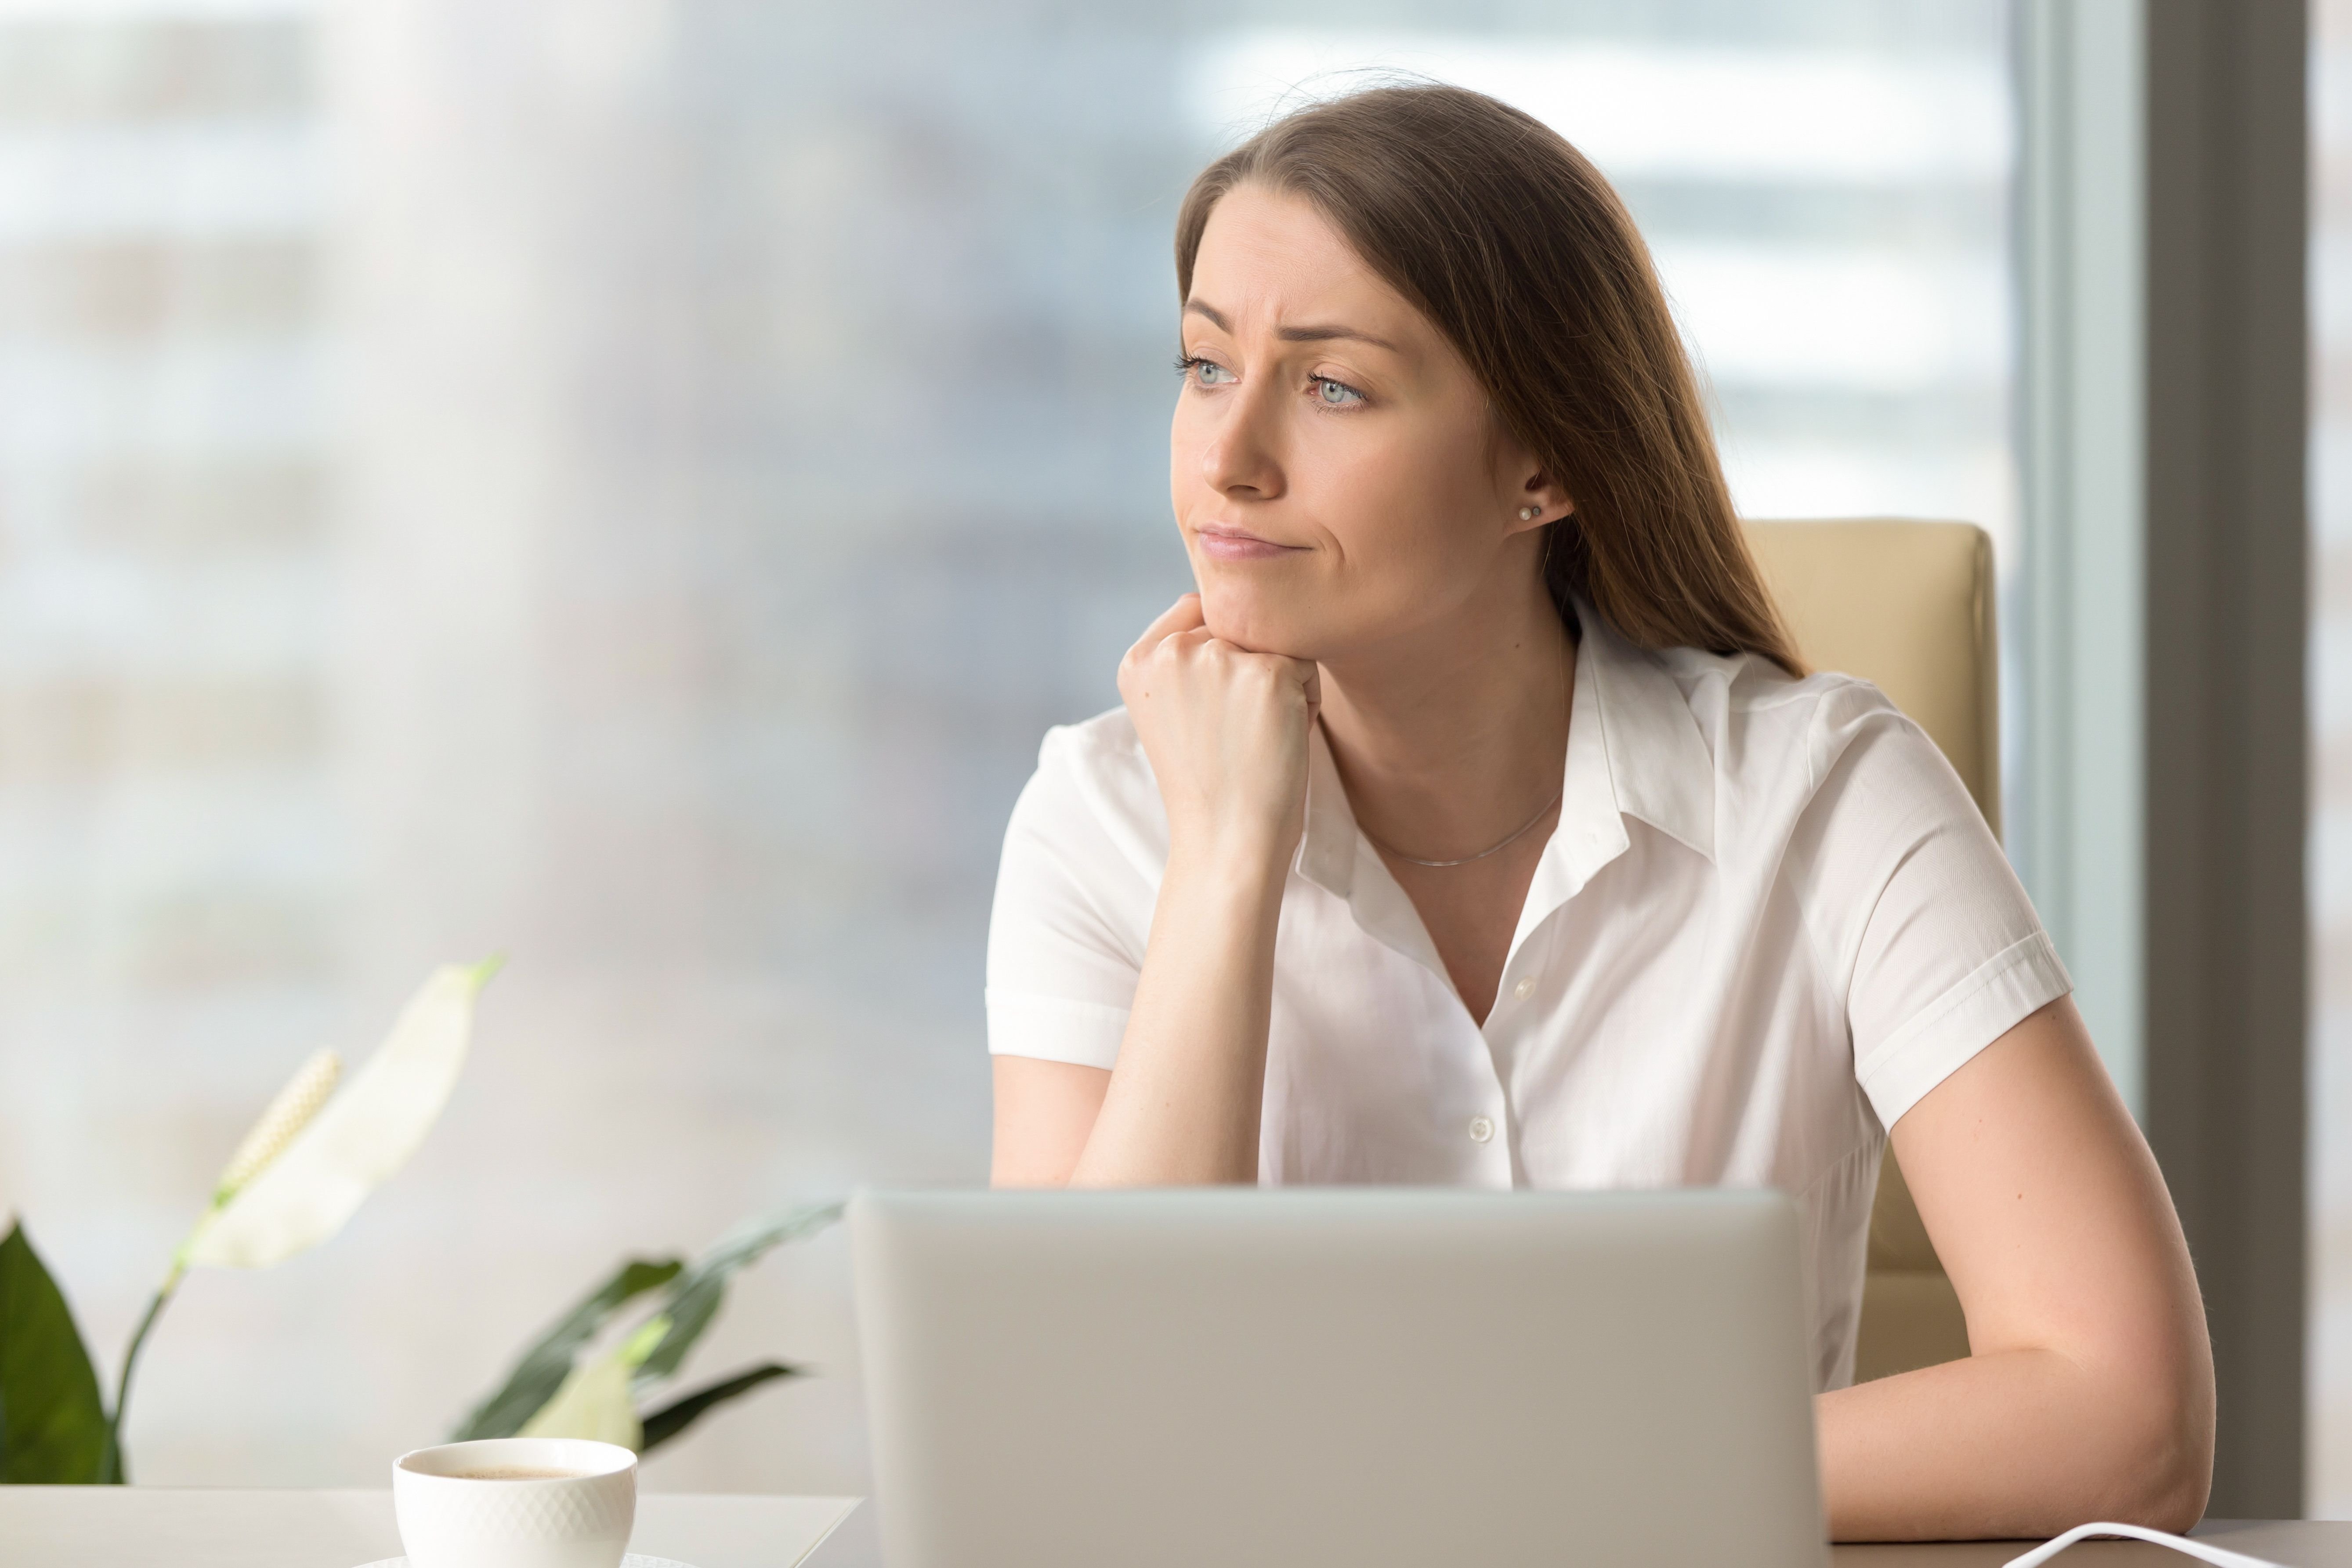 A woman thinking while working on something at work. | Source: Shutterstock